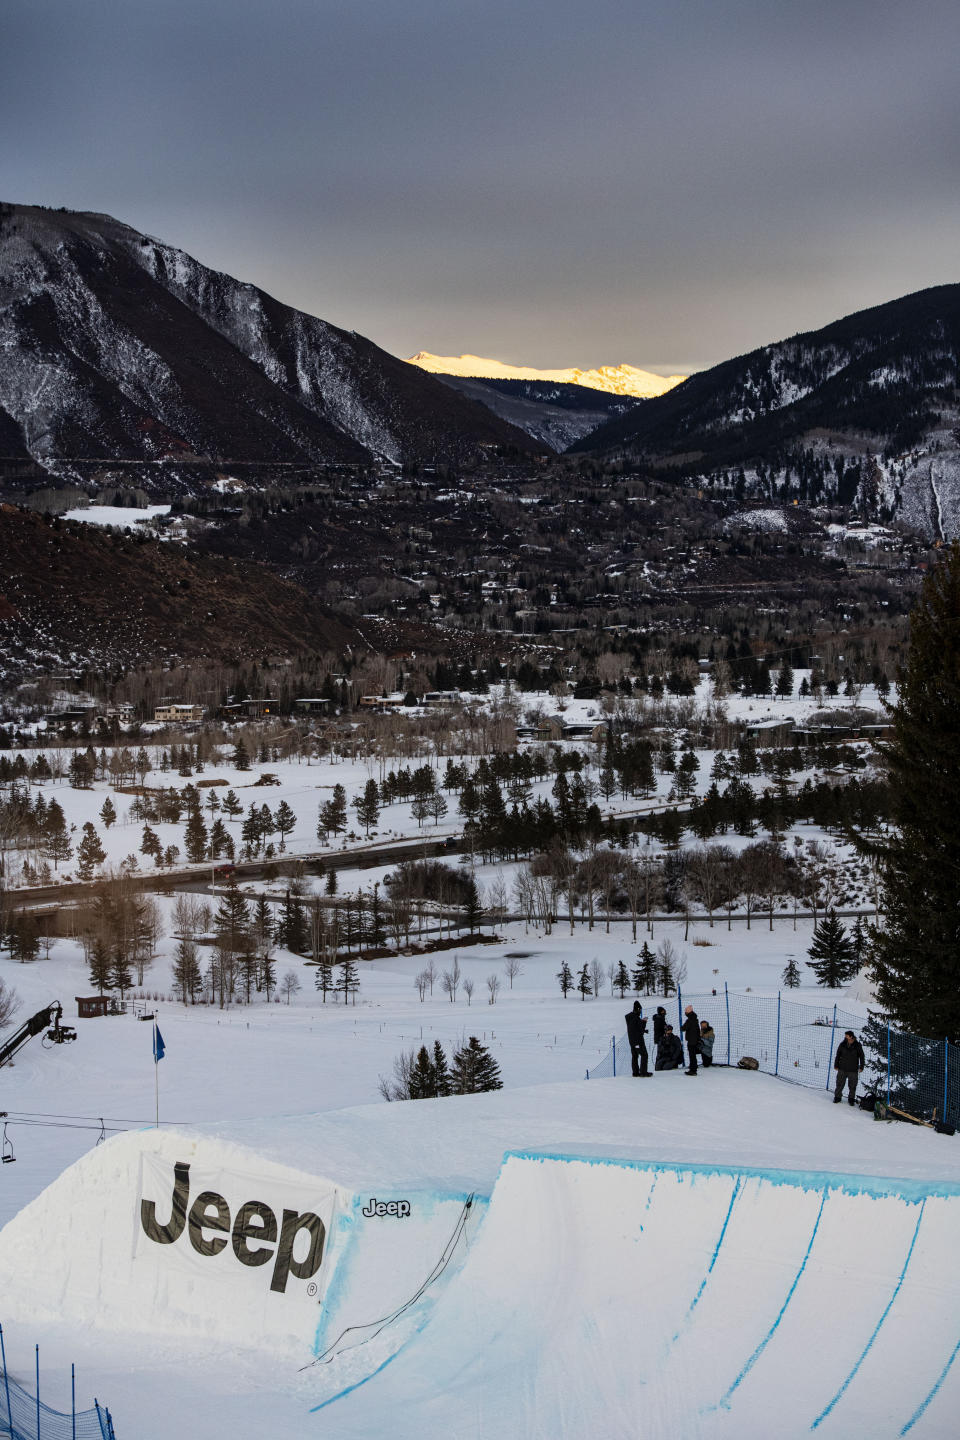 The sun sets during the knuckle huck and big air ski practice for the Winter X Games at Buttermilk on Thursday, Jan. 28, 2021, in Aspen, Colo. (Kelsey Brunner/The Aspen Times via AP)